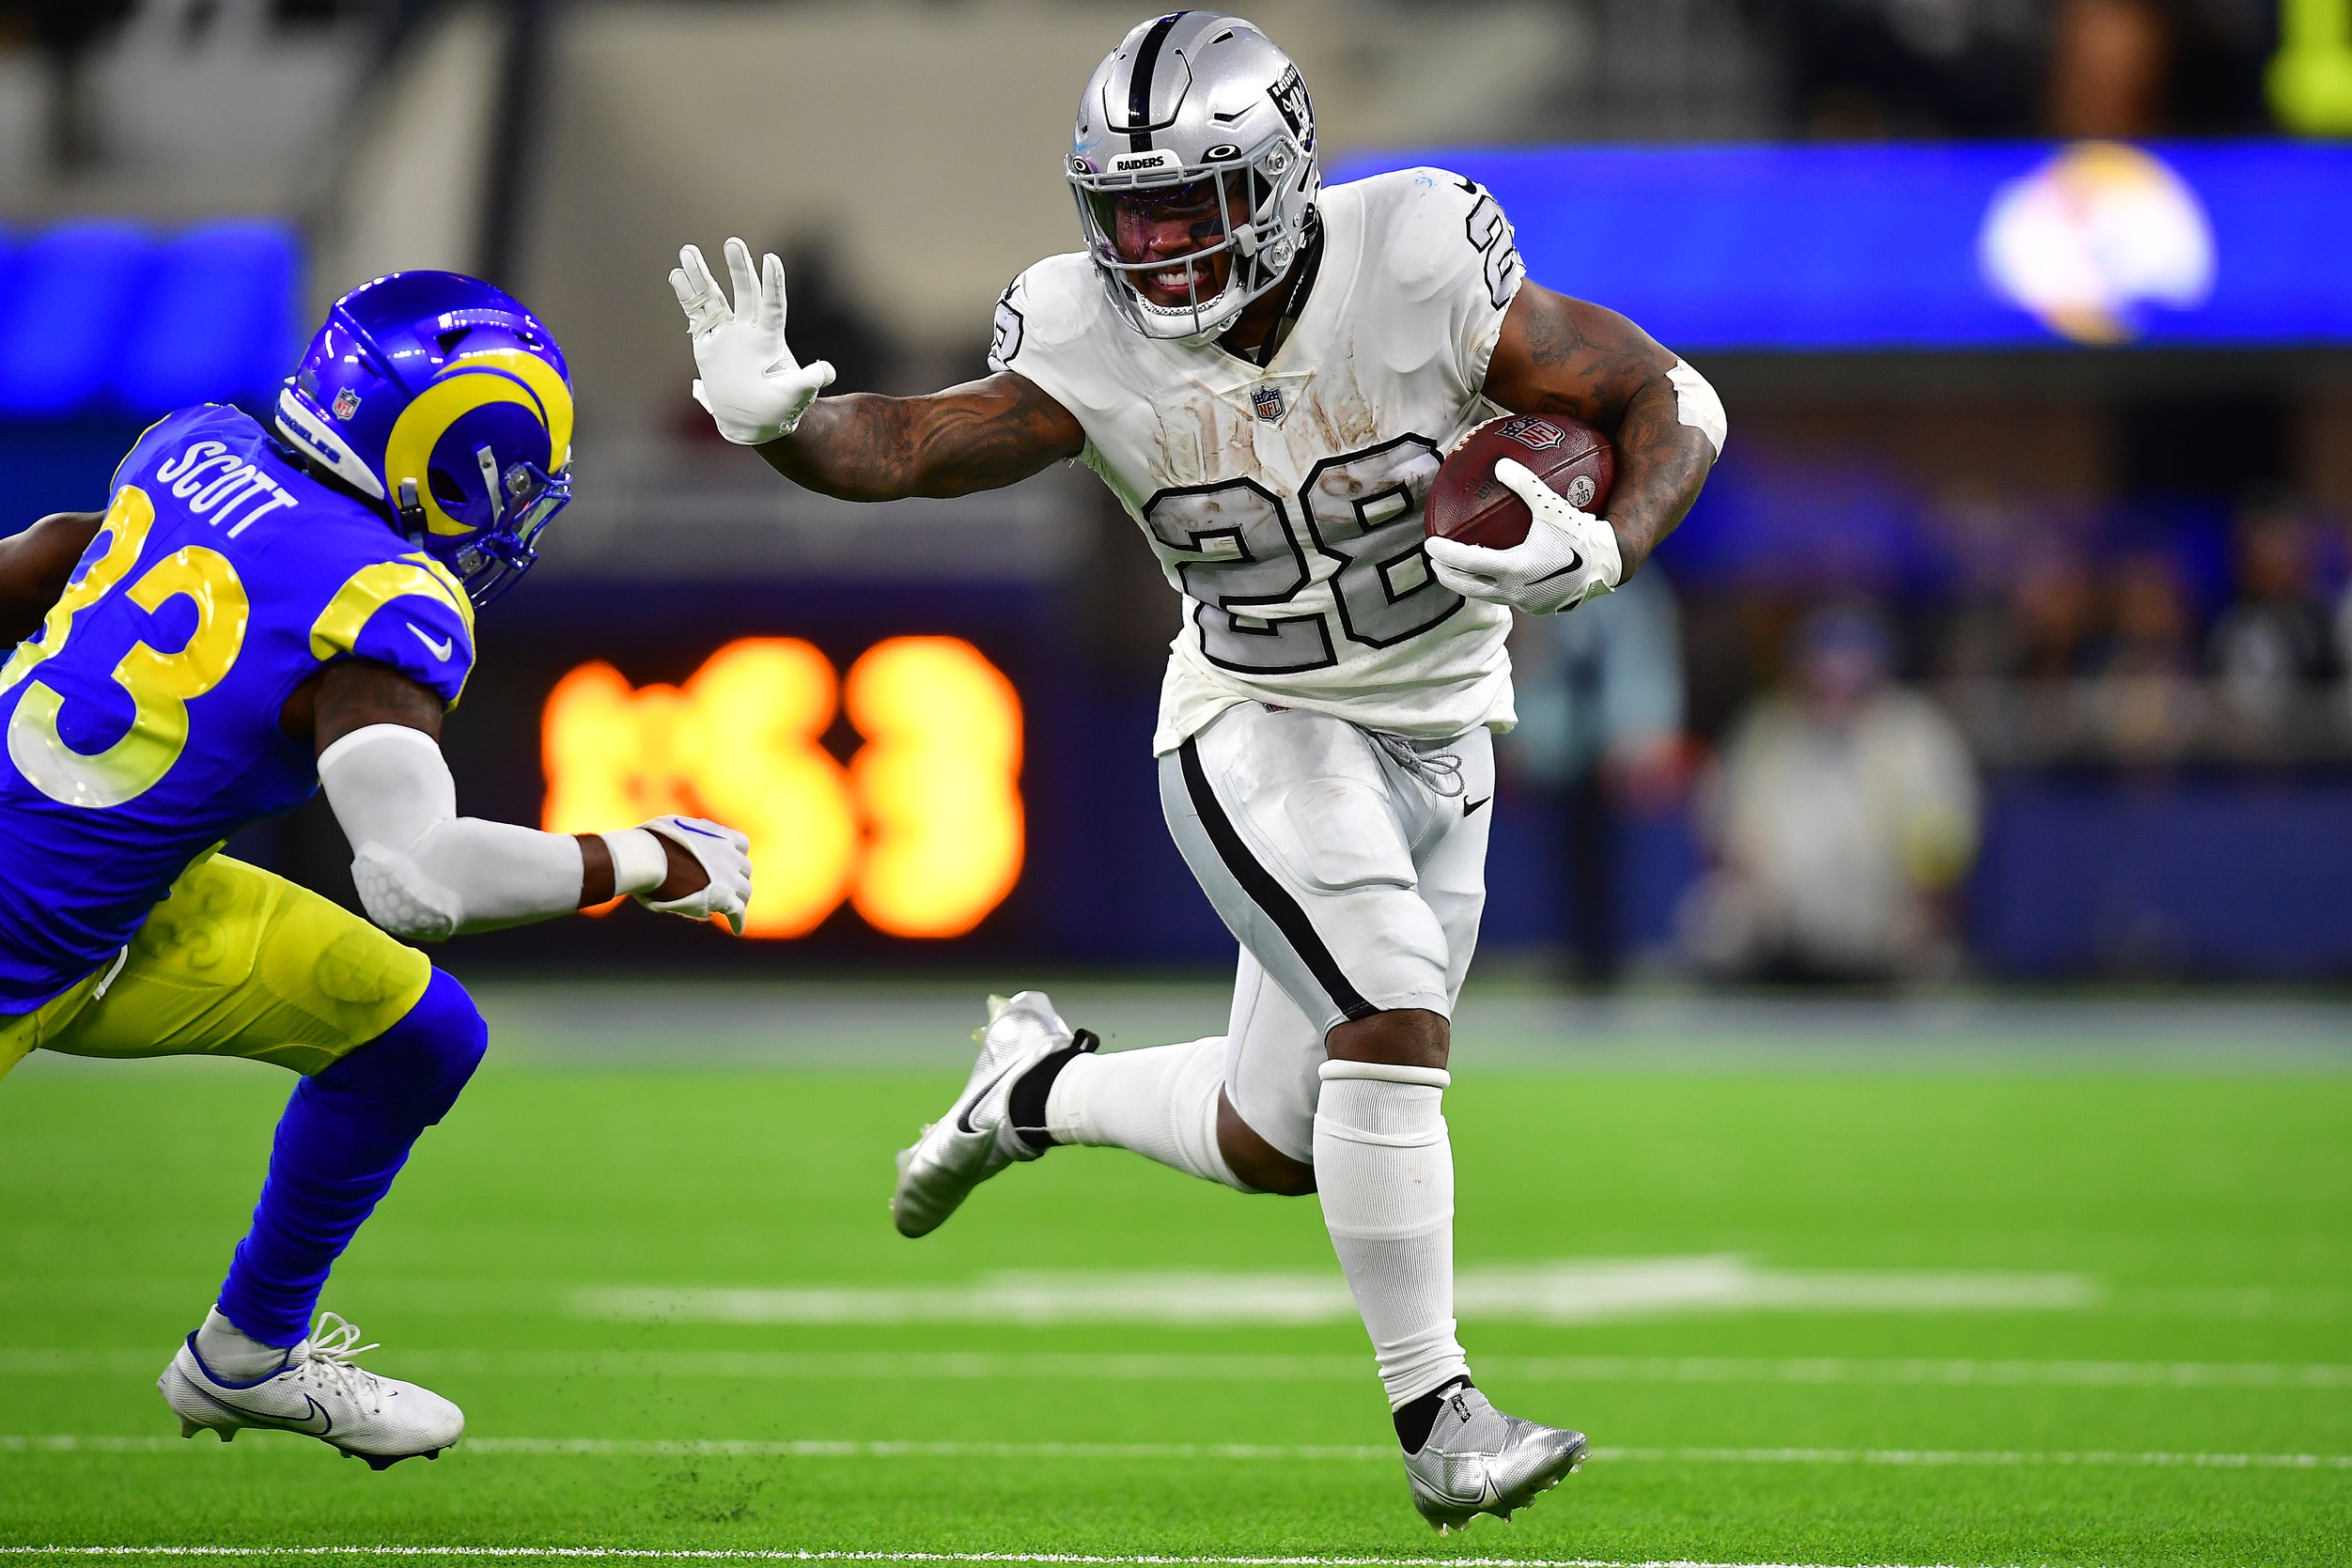 Josh Jacobs Raiders NFL: Josh Jacobs and Las Vegas Raiders agree on NFL  contract. Details here - The Economic Times